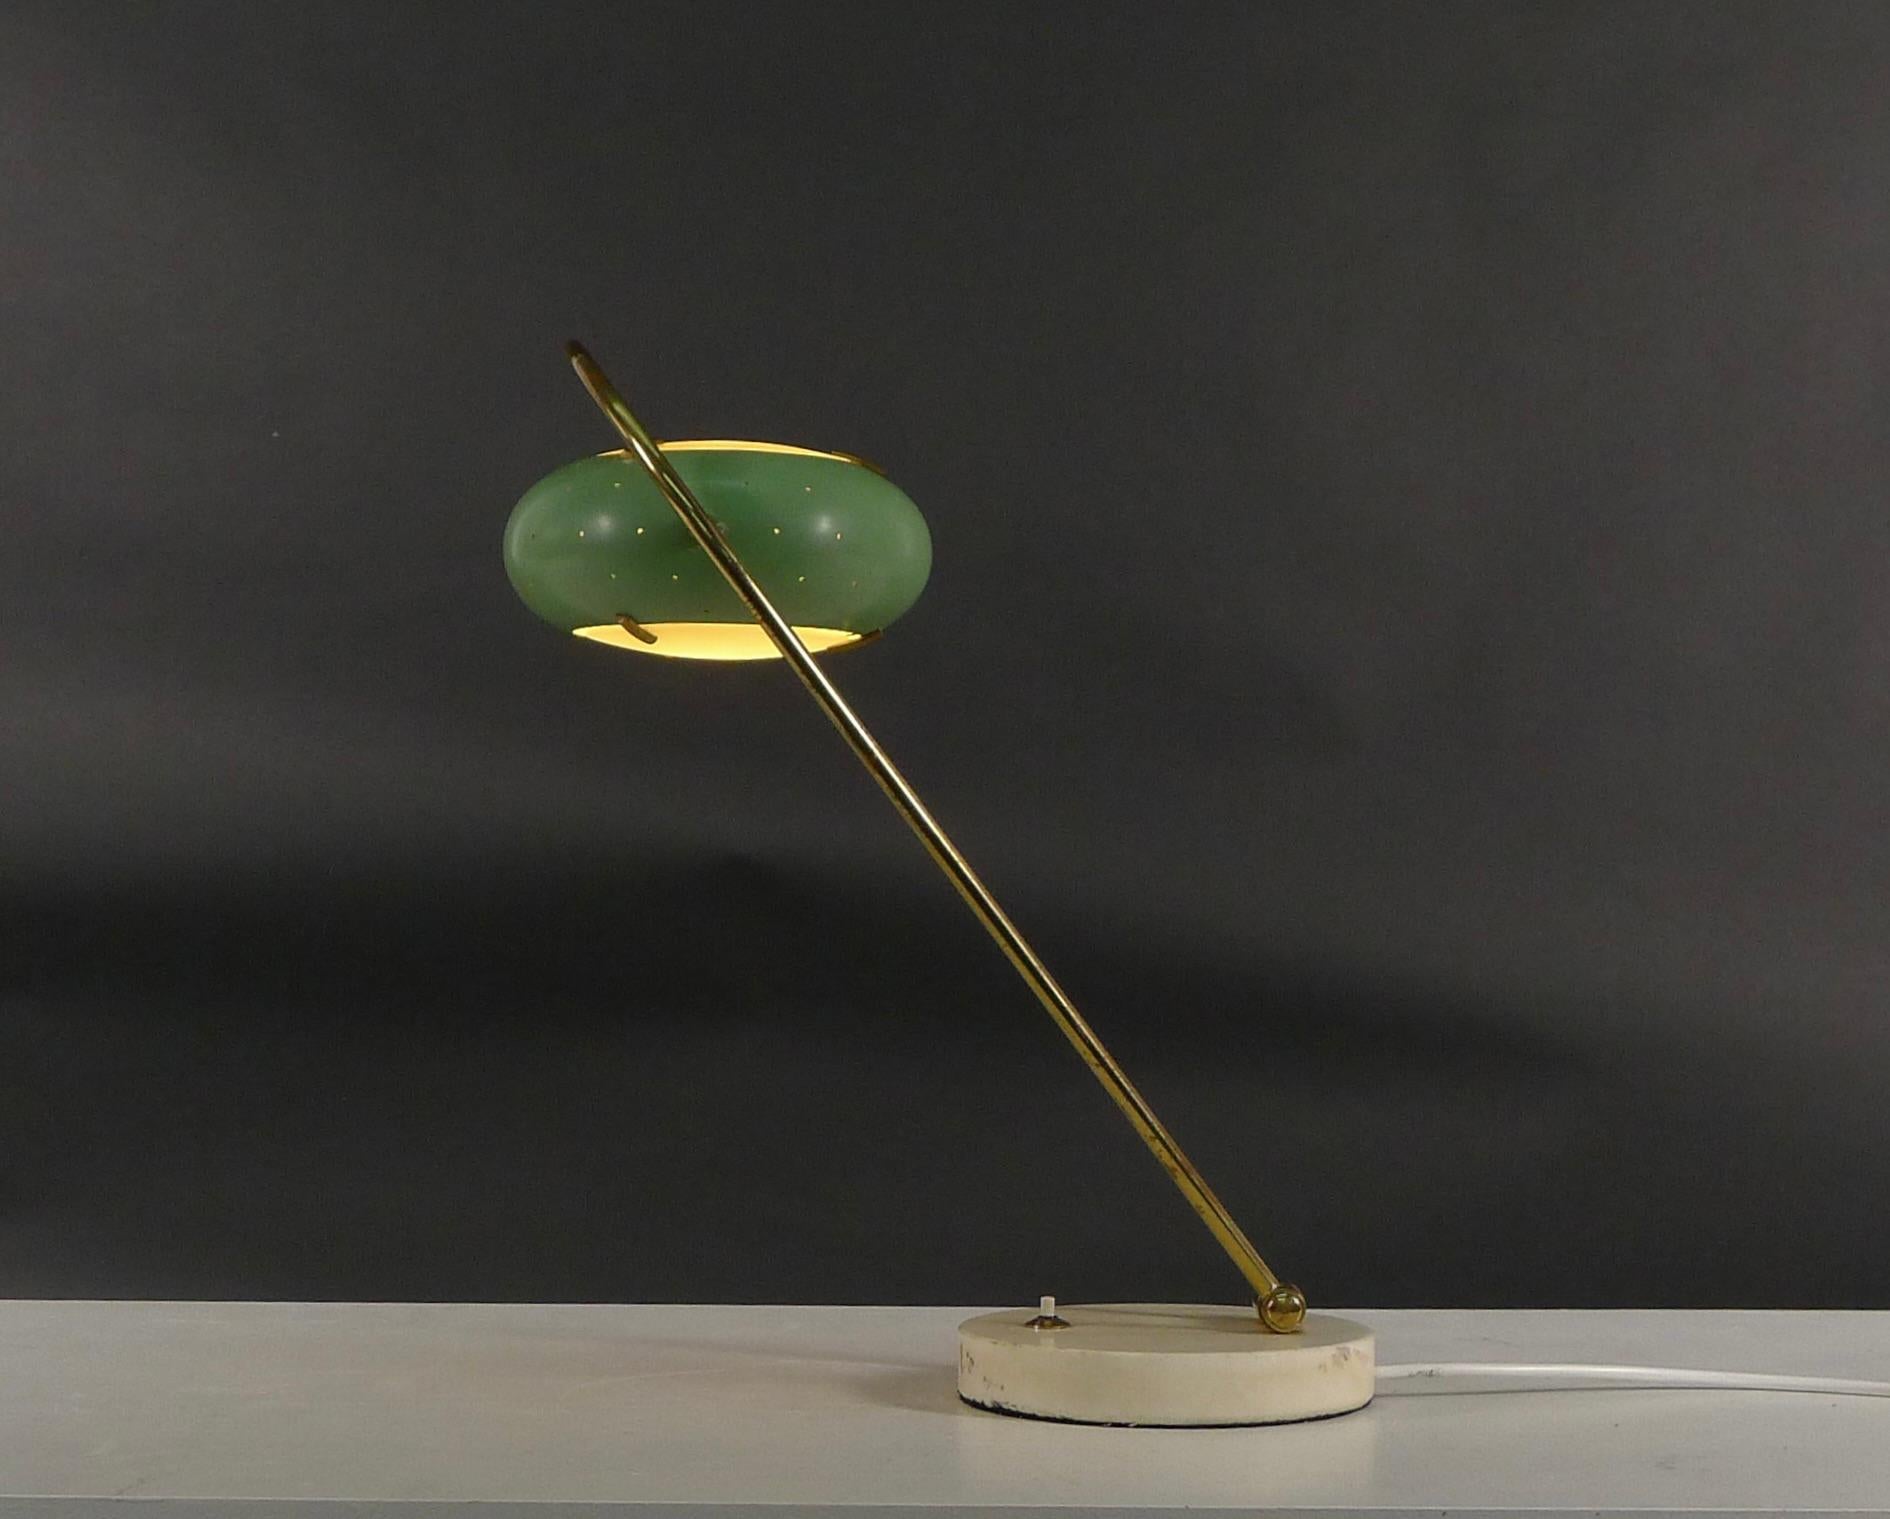 Stilux adjustable desk or table lamp, dating from the 1950s.

Fully adjustable, with perforated green enamelled shade inset with glass discs suspended within a brass hoop support on circular white marble base.

Both the shade and the brass support